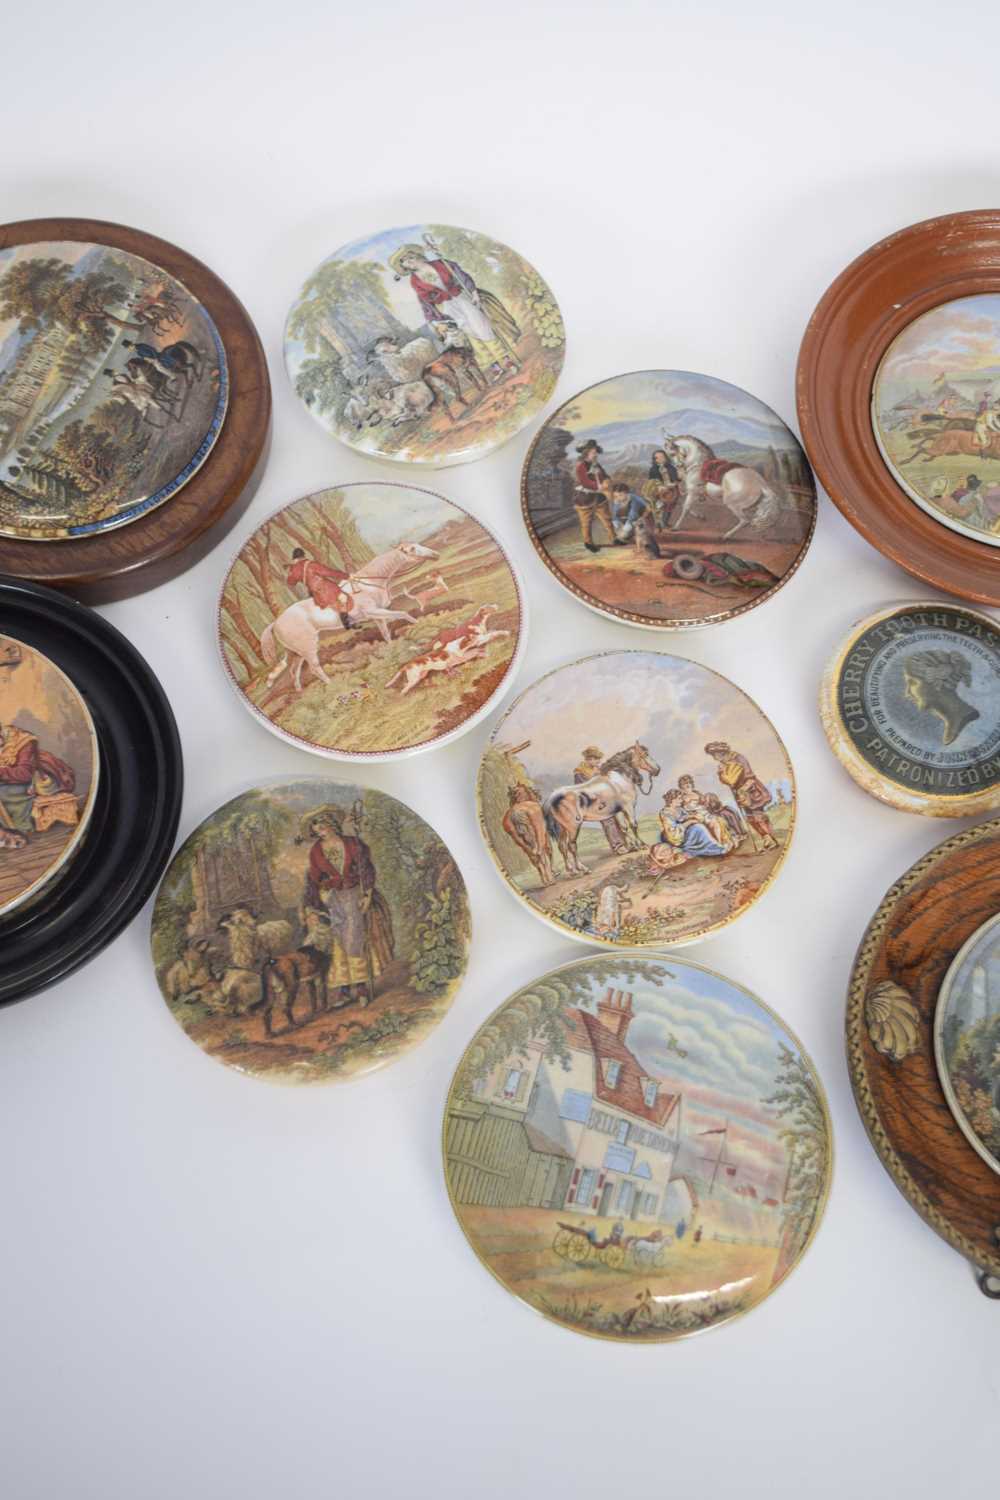 Collection of pot lids, some with wooden mounts including 'On guard', horse racing scene, HRH Prince - Image 4 of 4